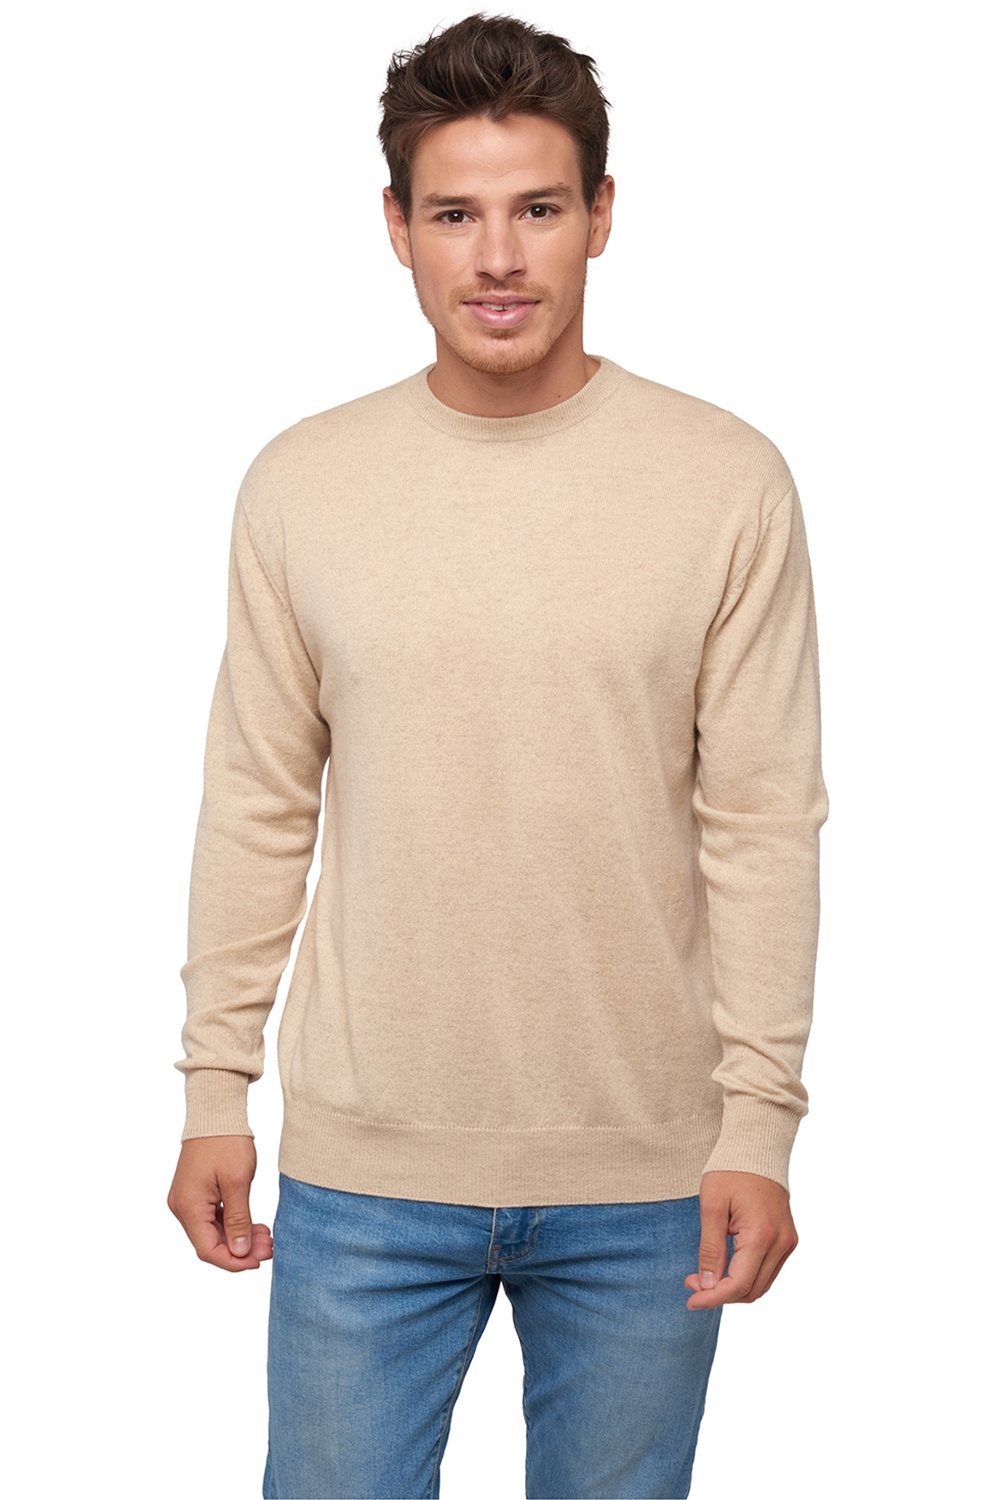 Cachemire Naturel pull homme col rond natural ness 4f natural beige s